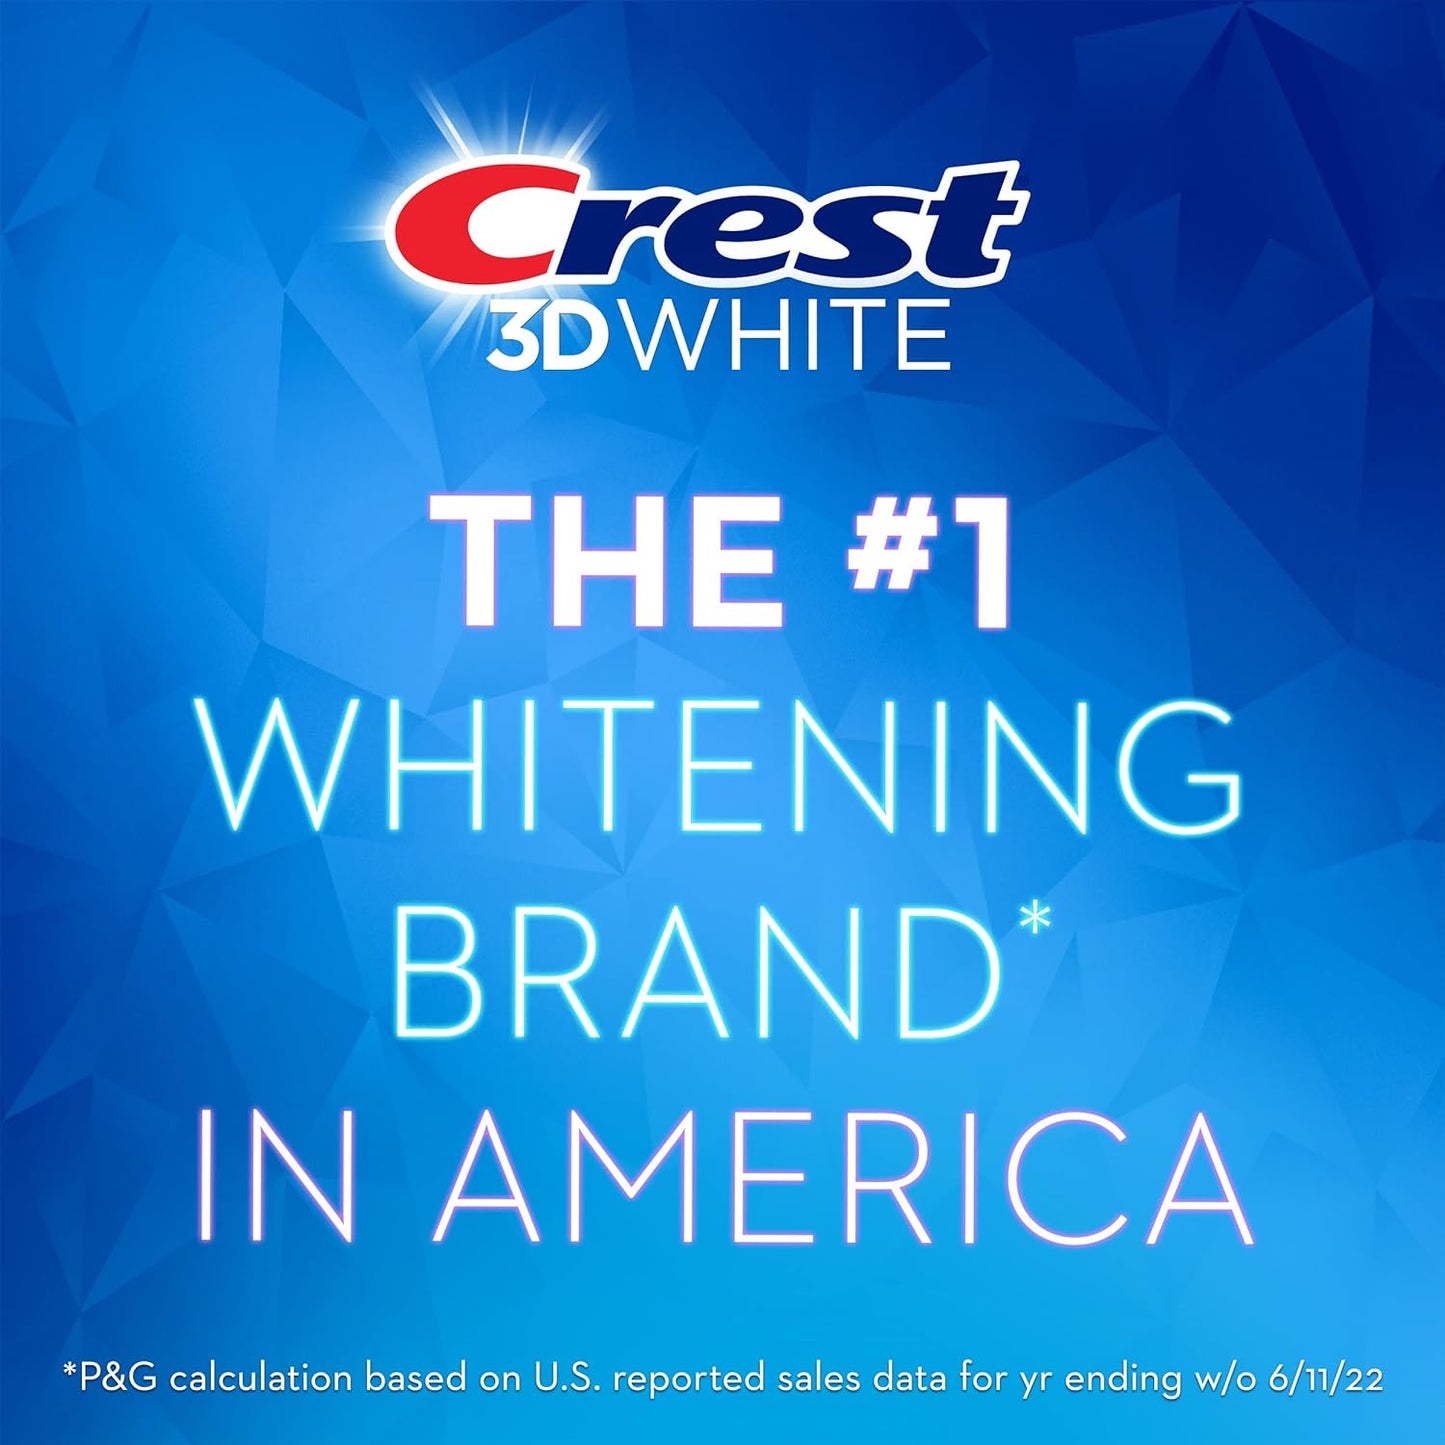 Crest 3D White Toothpaste, Advanced Luminous Mint, Teeth Whitening Toothpaste, 3.7 Oz (Pack of 4)